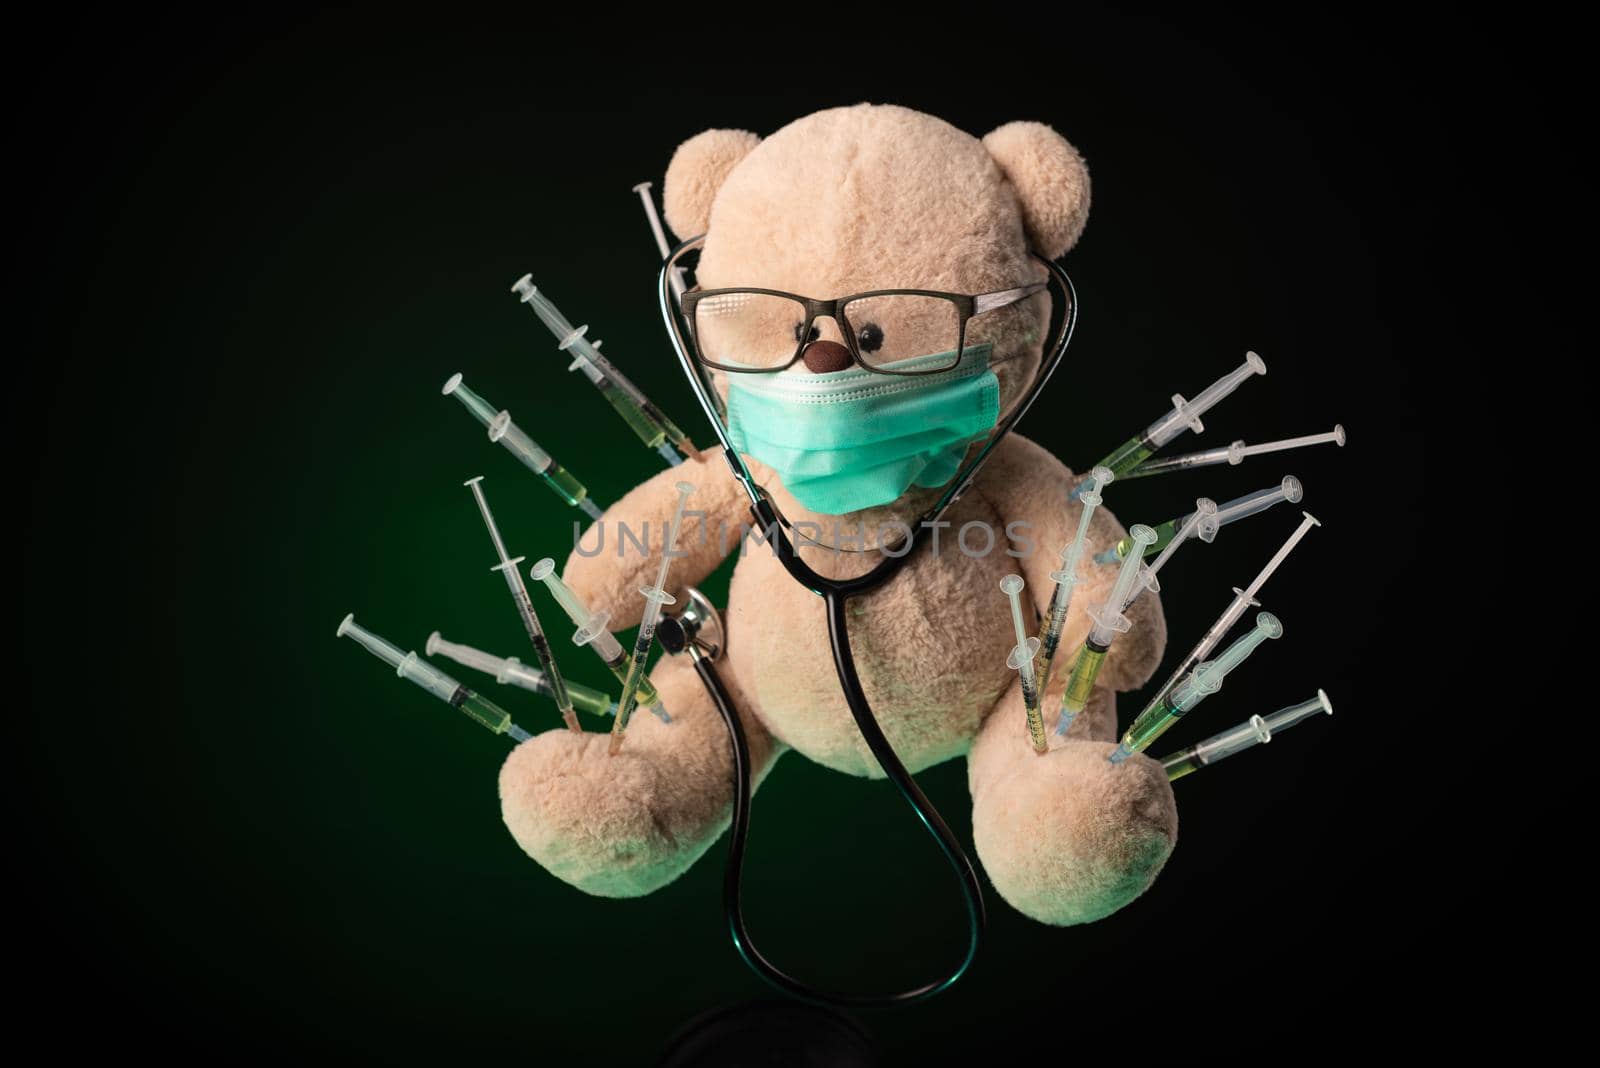 the children's vaccination against the covid19 virus and vaccinations on the example of a teddy bear